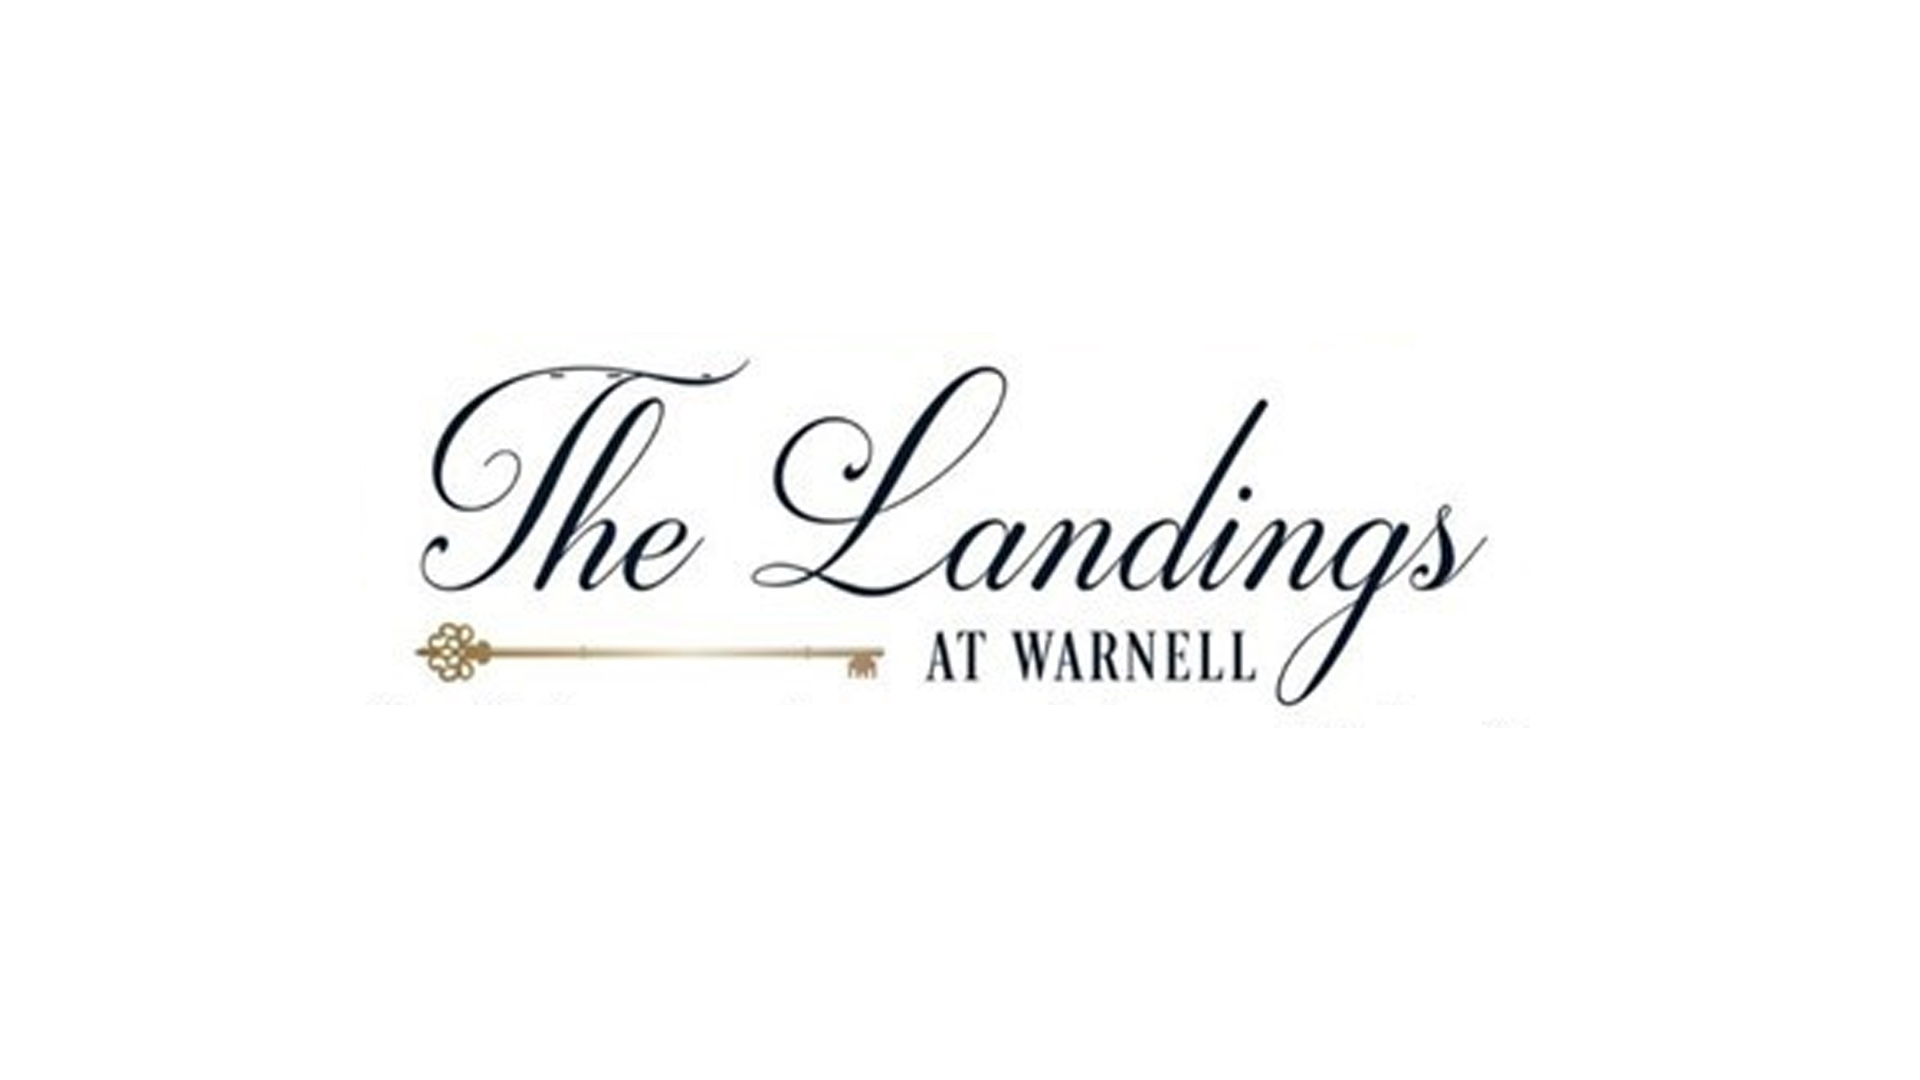 The Landings at Warnell Sewer Improvements